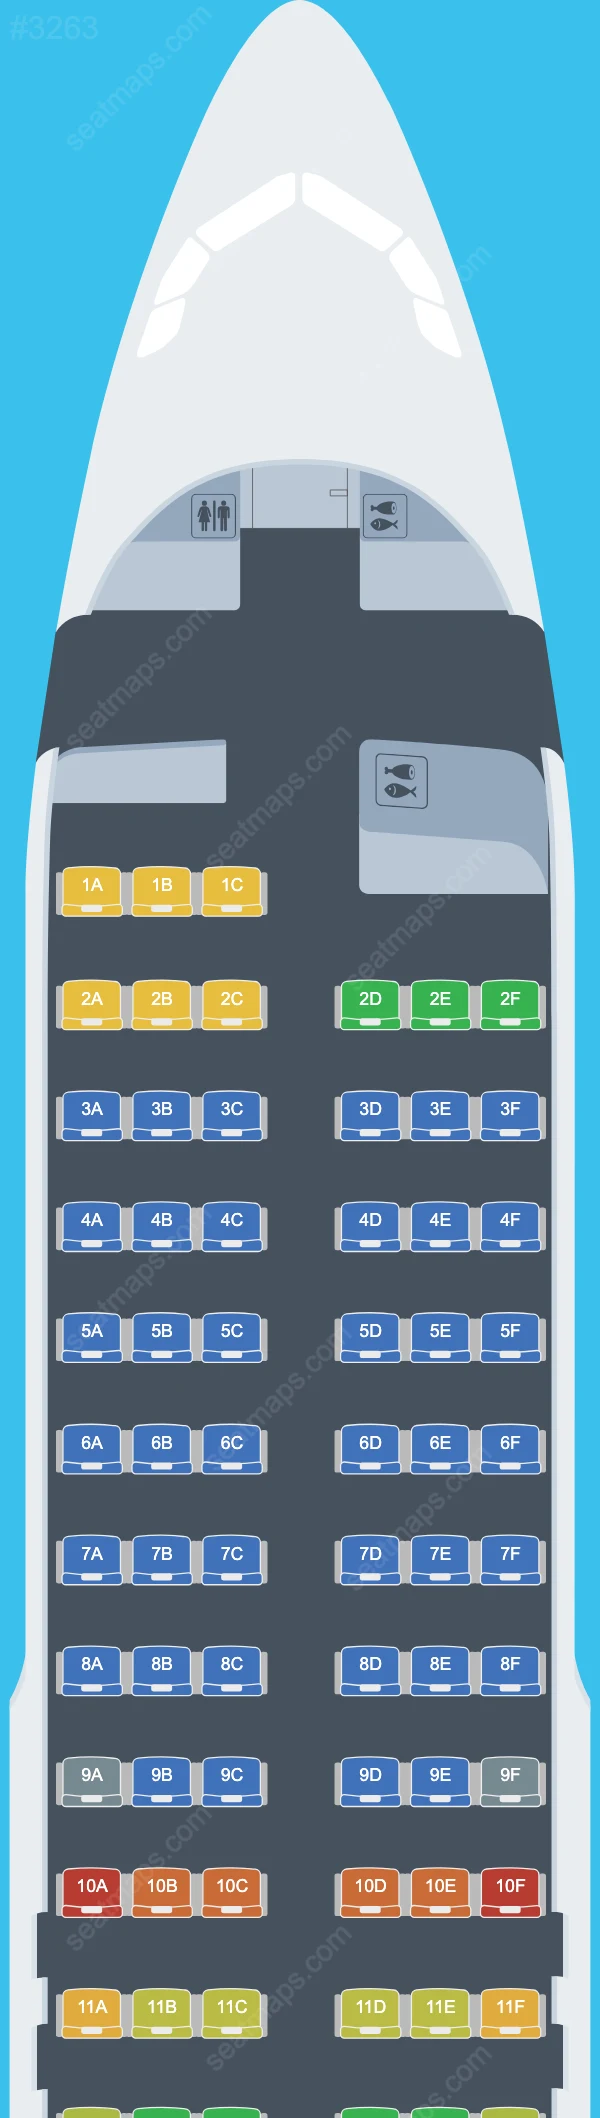 Azores Airlines Airbus A320 Seat Maps A320-200 V.1